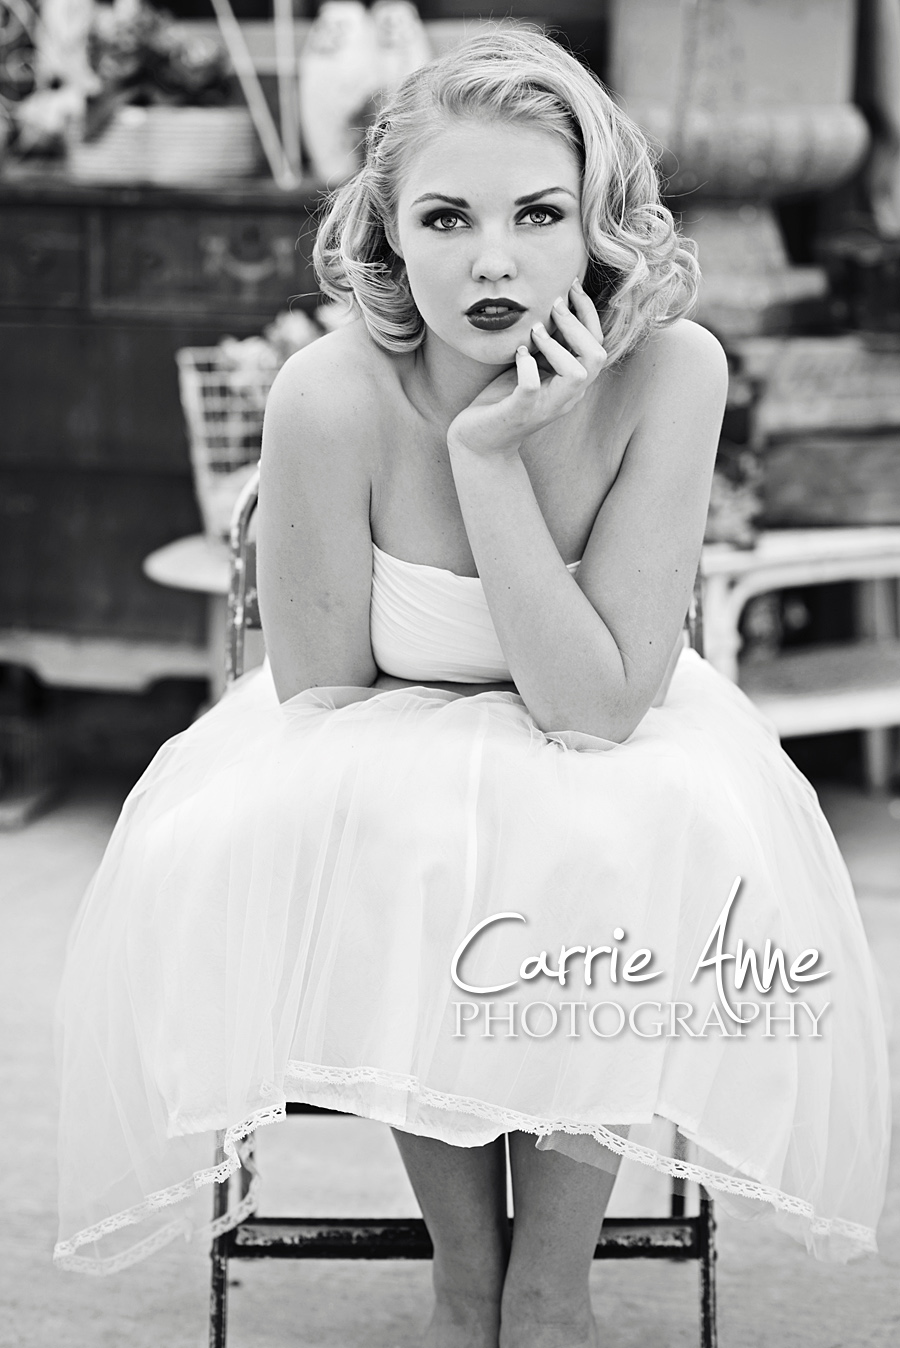 Carrie Anne Photography-Marilyn Monroe Session